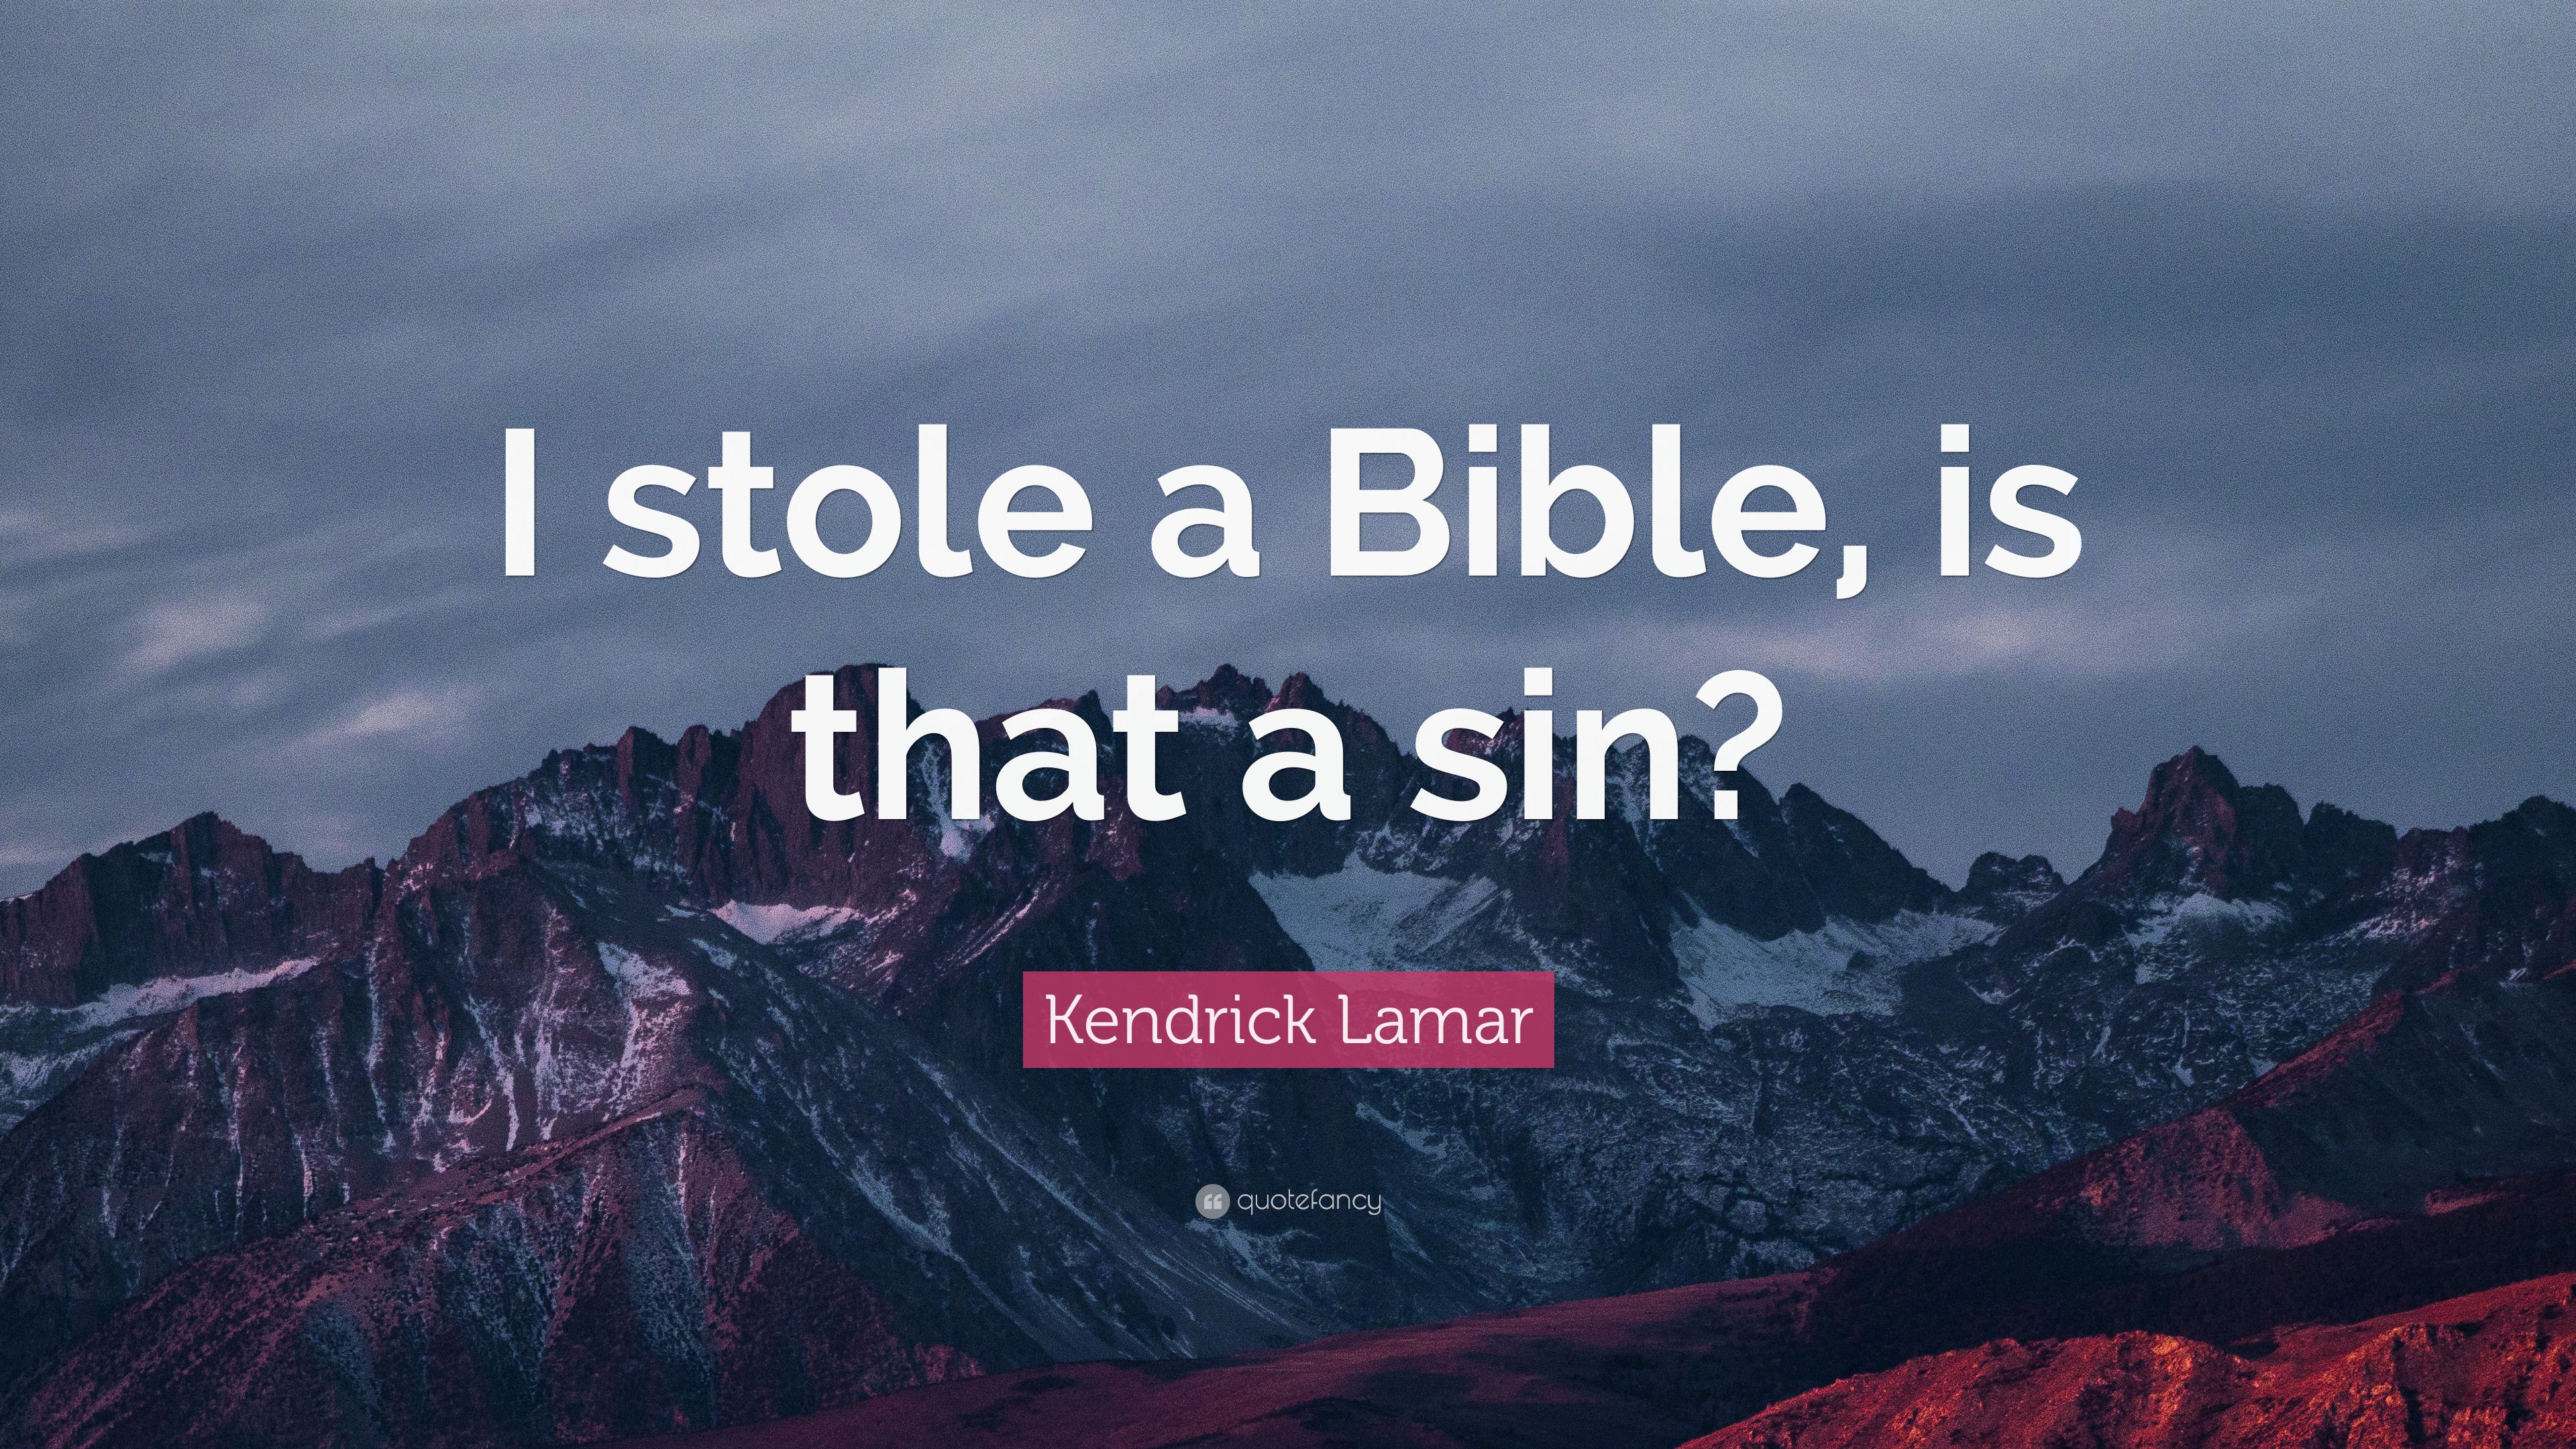 Kendrick Lamar Quote: “I stole a Bible, is that a sin?” (7 wallpaper)